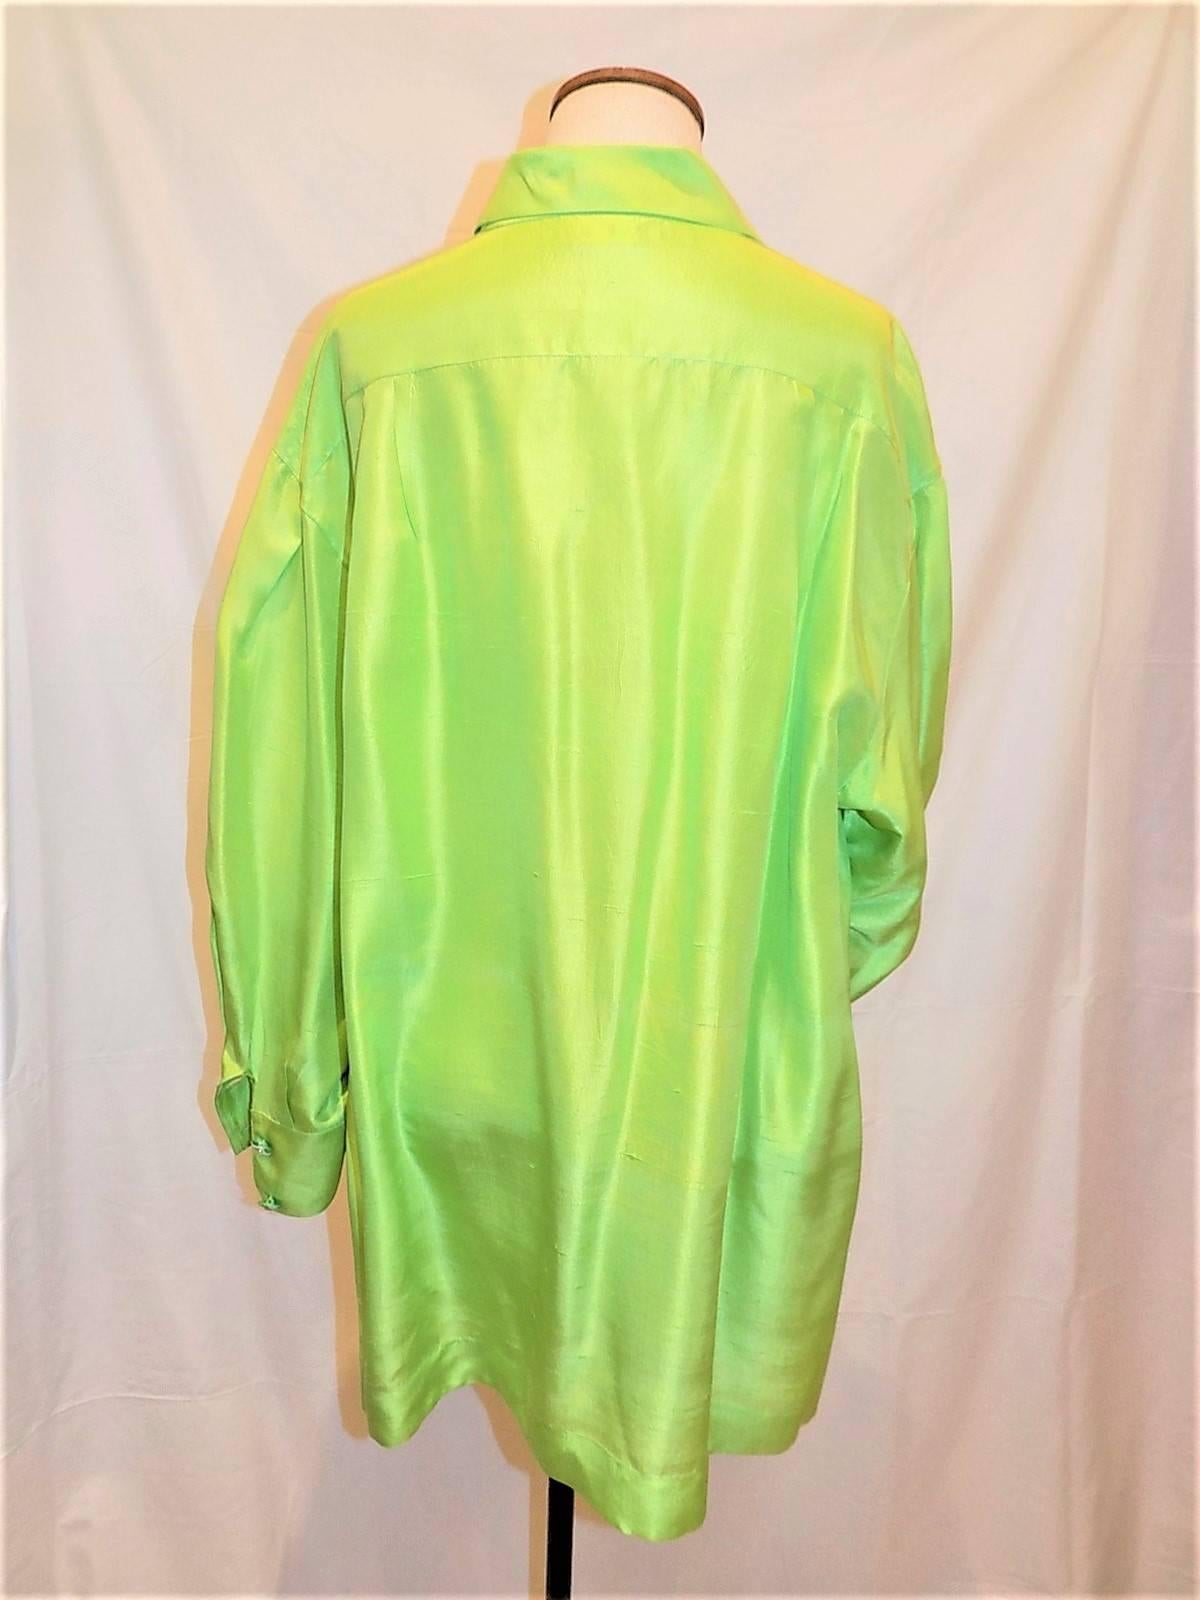 Silk vintage Chanel lime green silk blouse top tunic. Side slits. Front button down closure with  green and white carved cc logo buttons. Excellent contion. 
Bust 44 